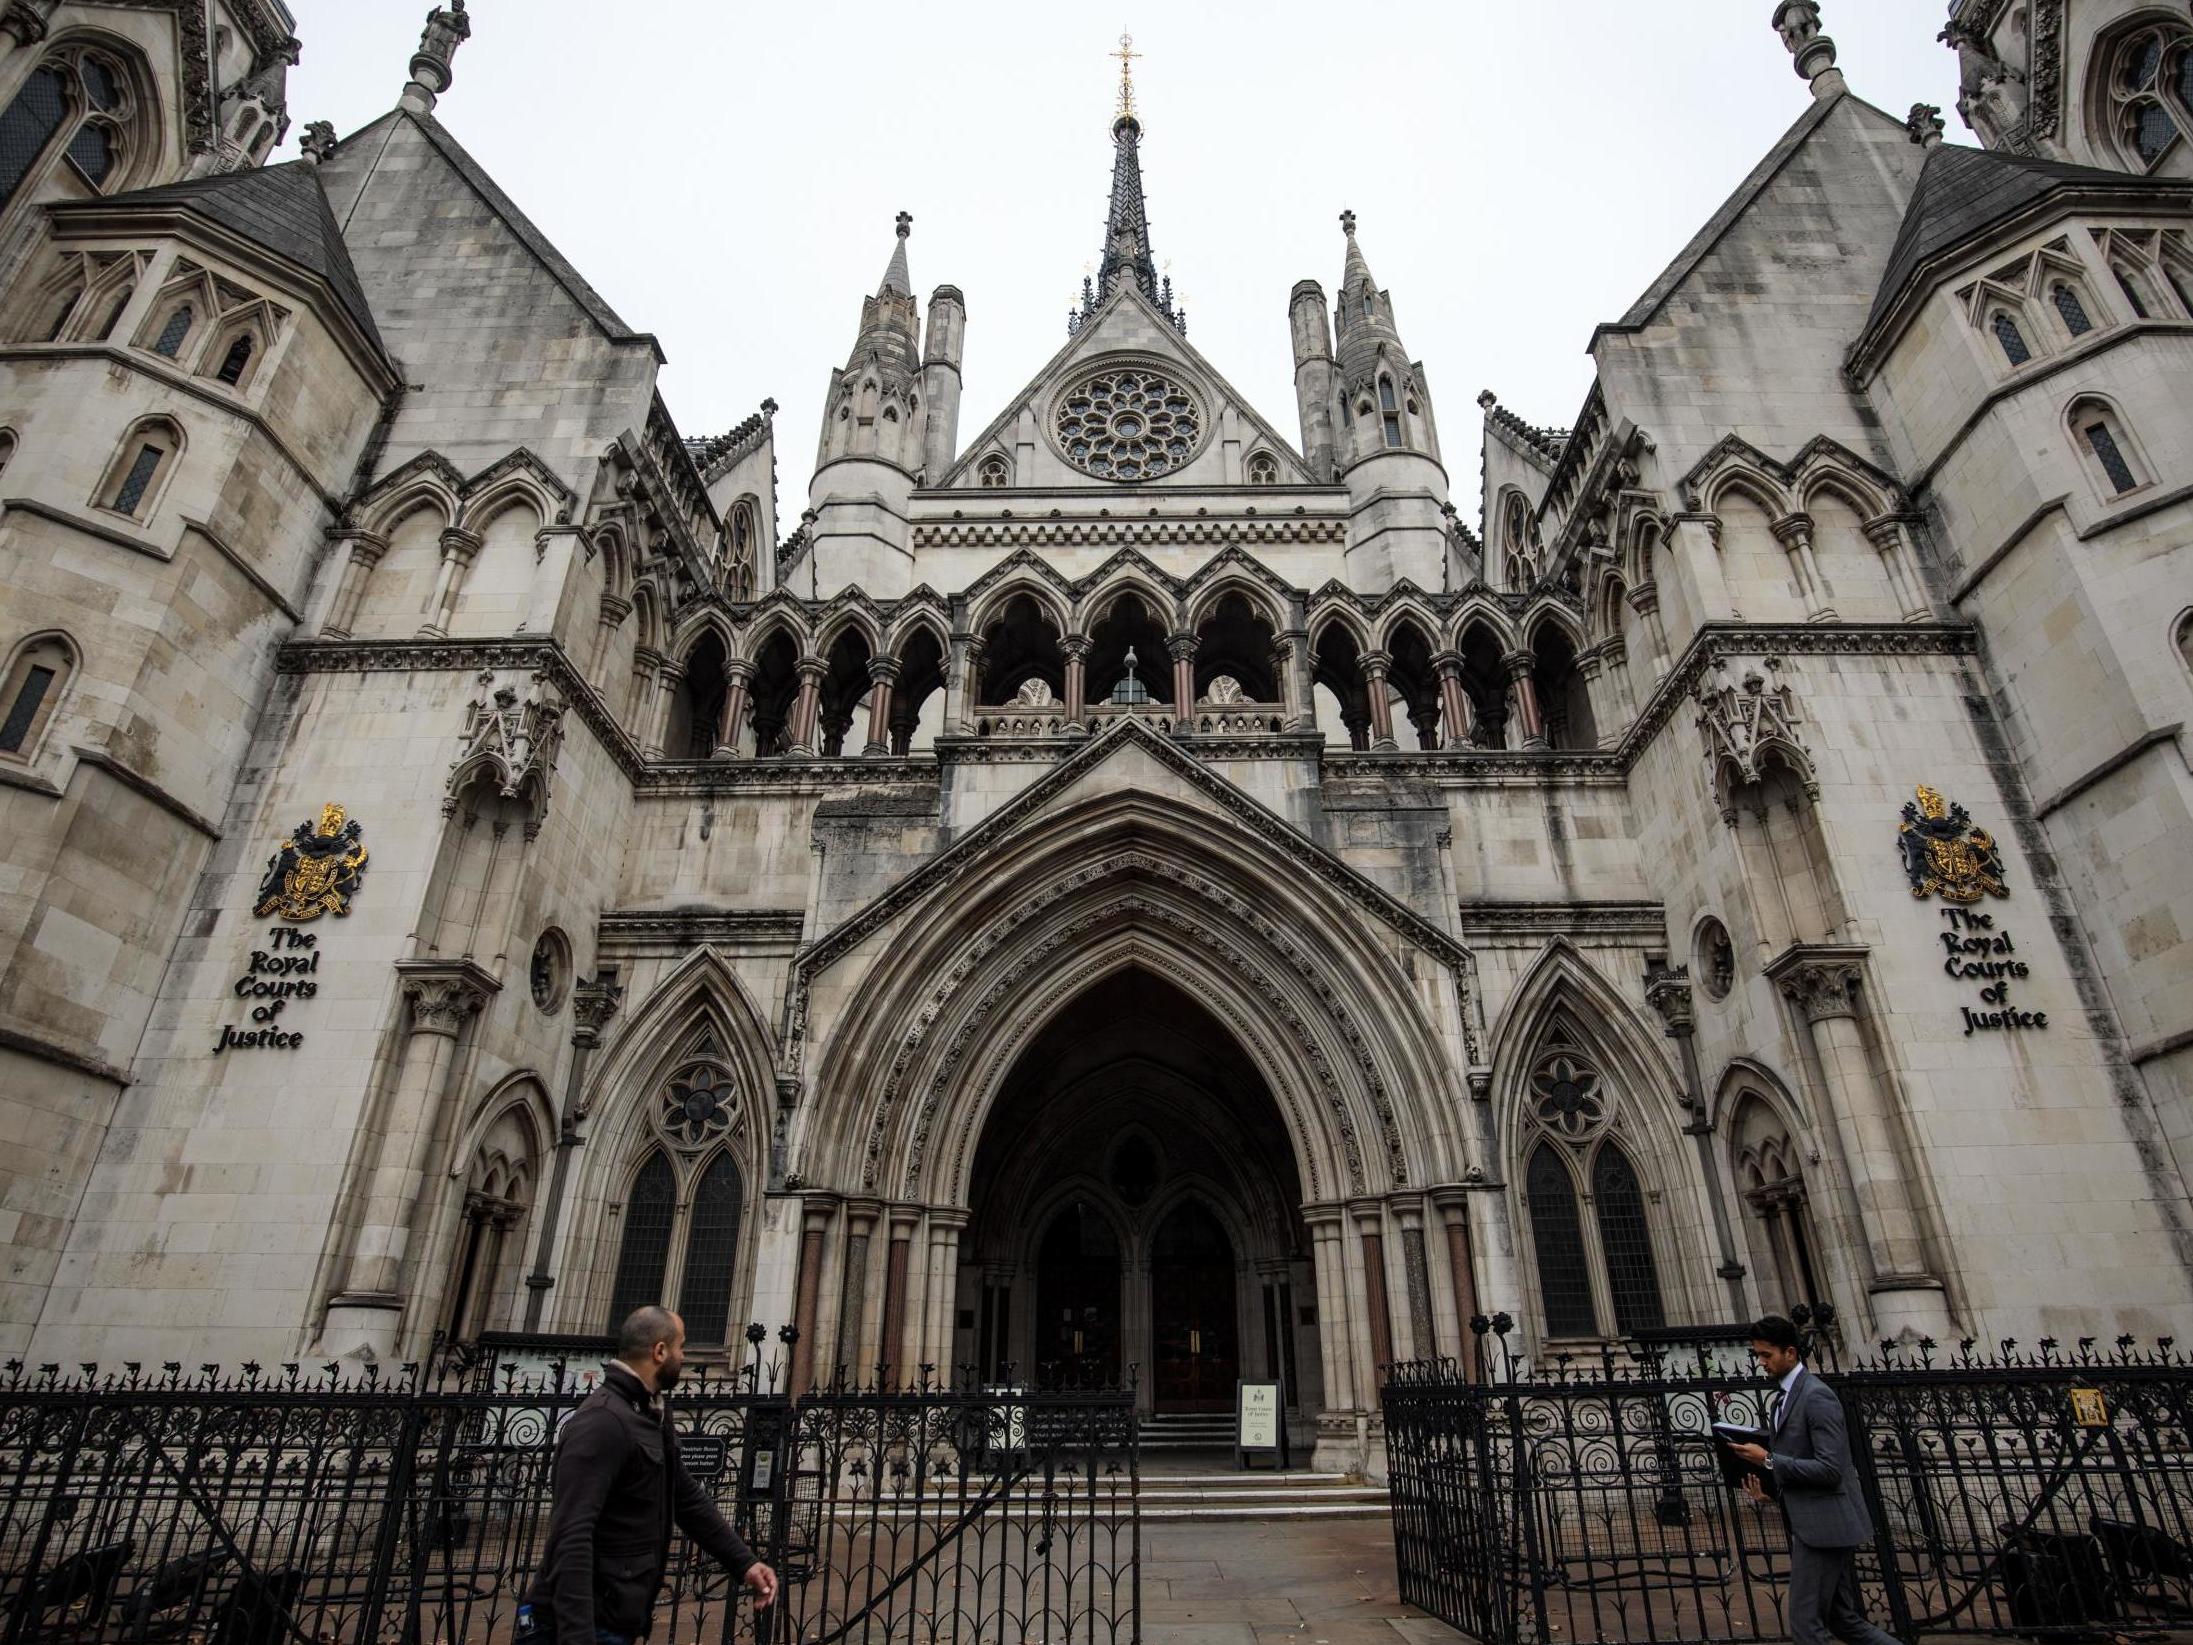 The case will be reviewed by a judge in the Family Division of the High Court in London